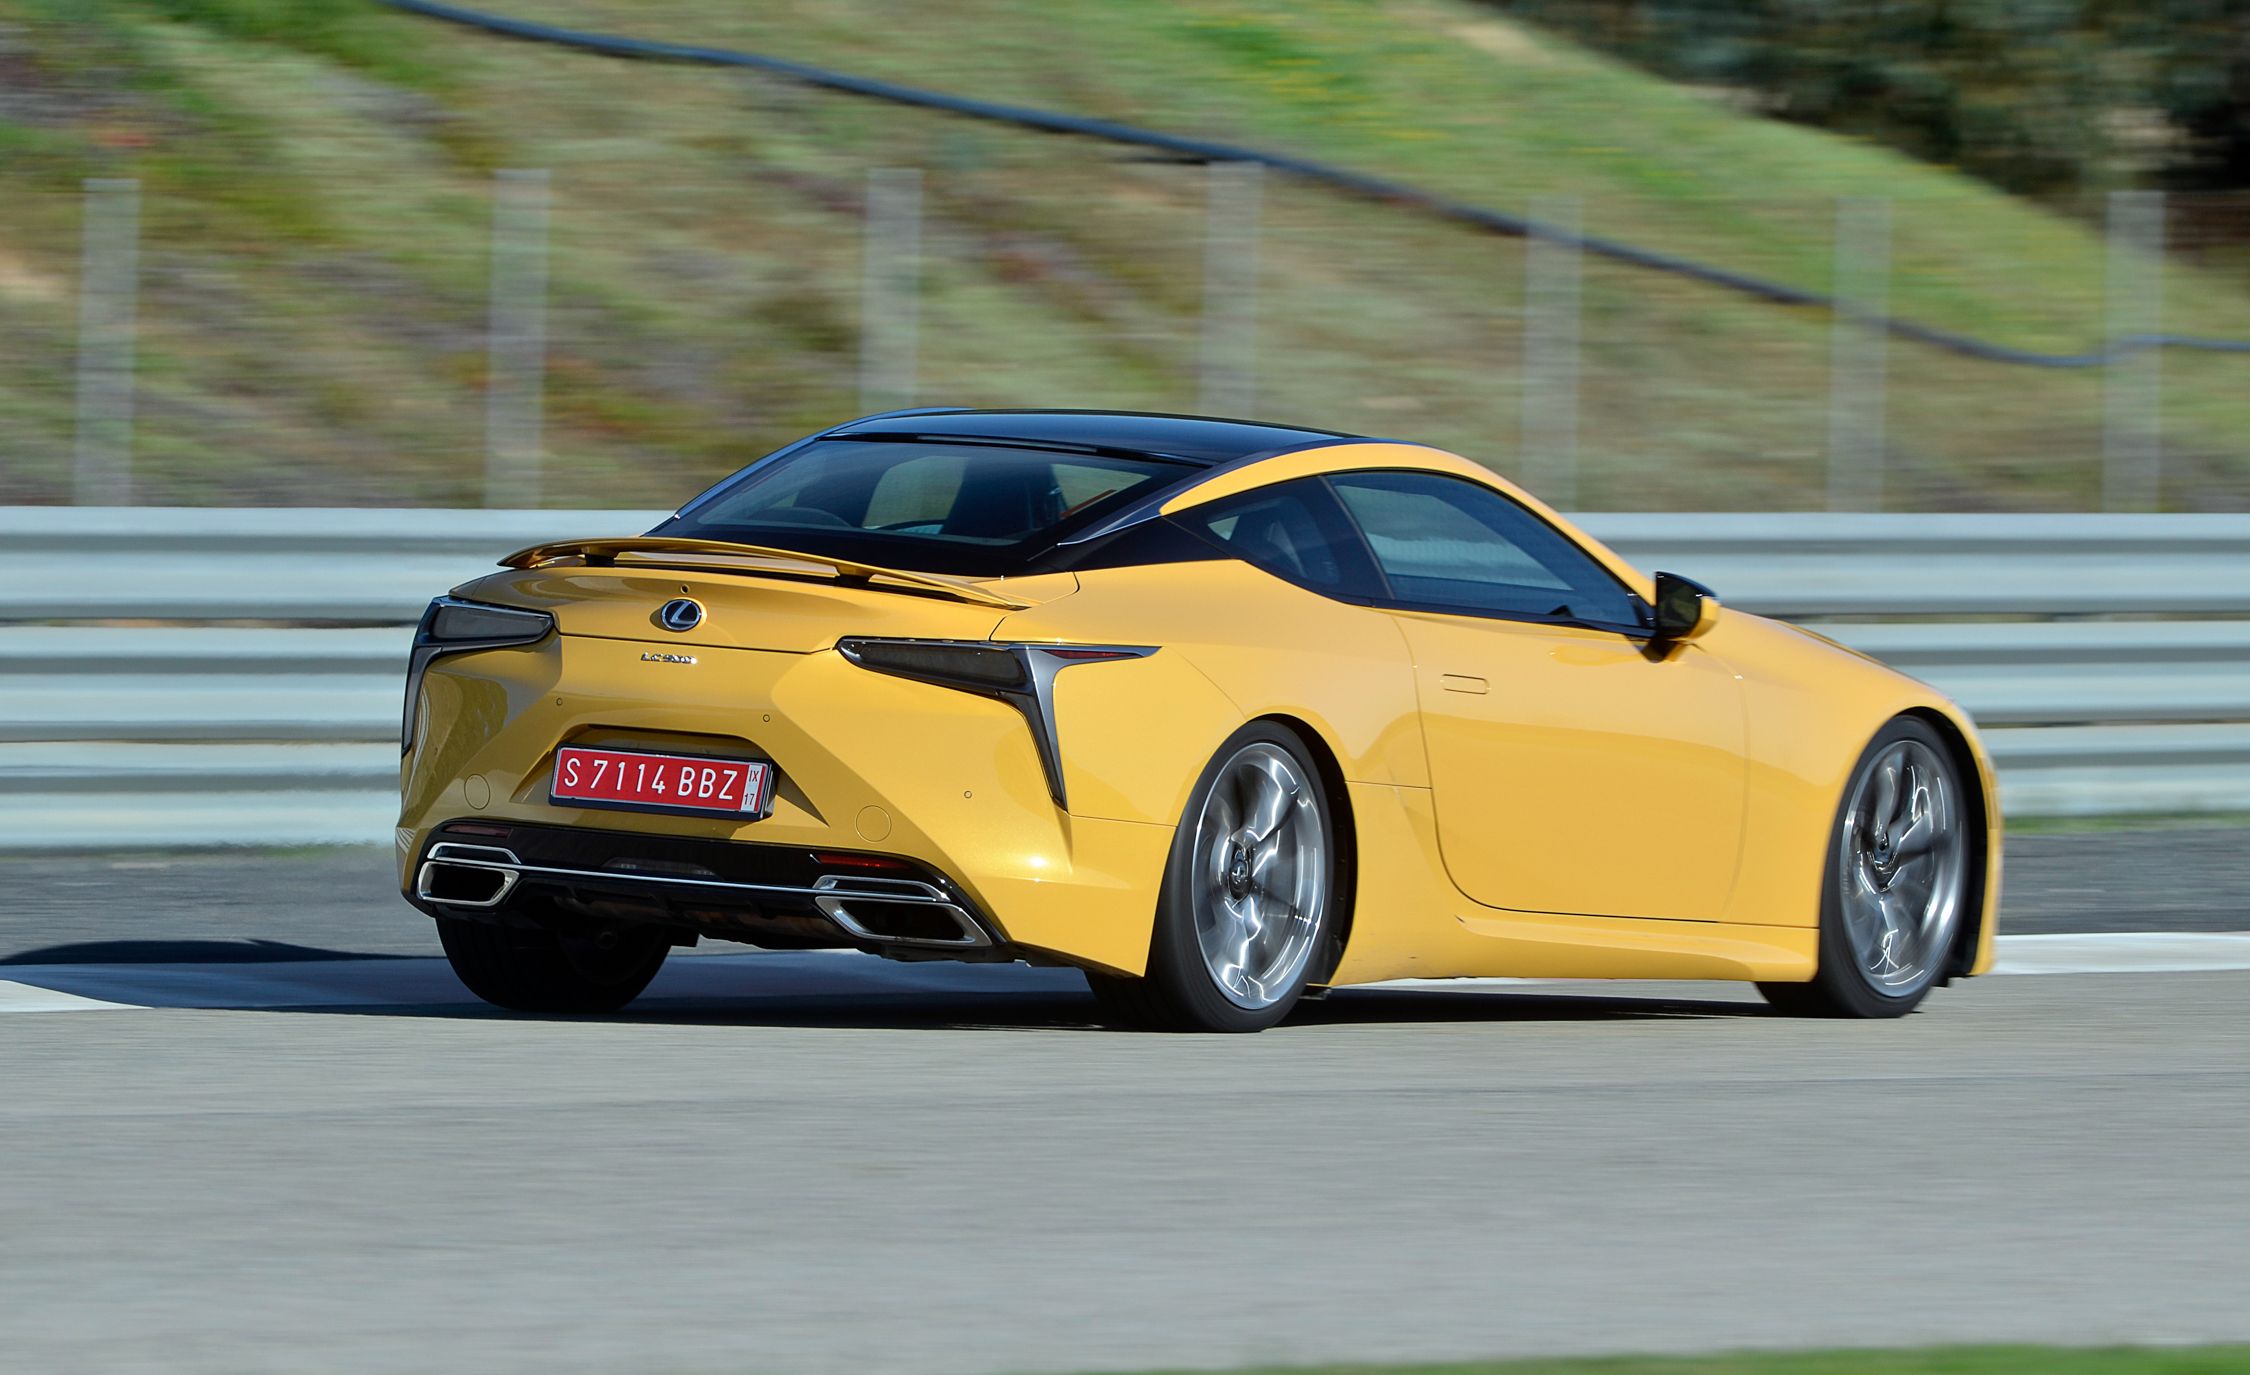 2018 Lexus Lc 500 Yellow Test Drive Rear And Side View (View 14 of 84)